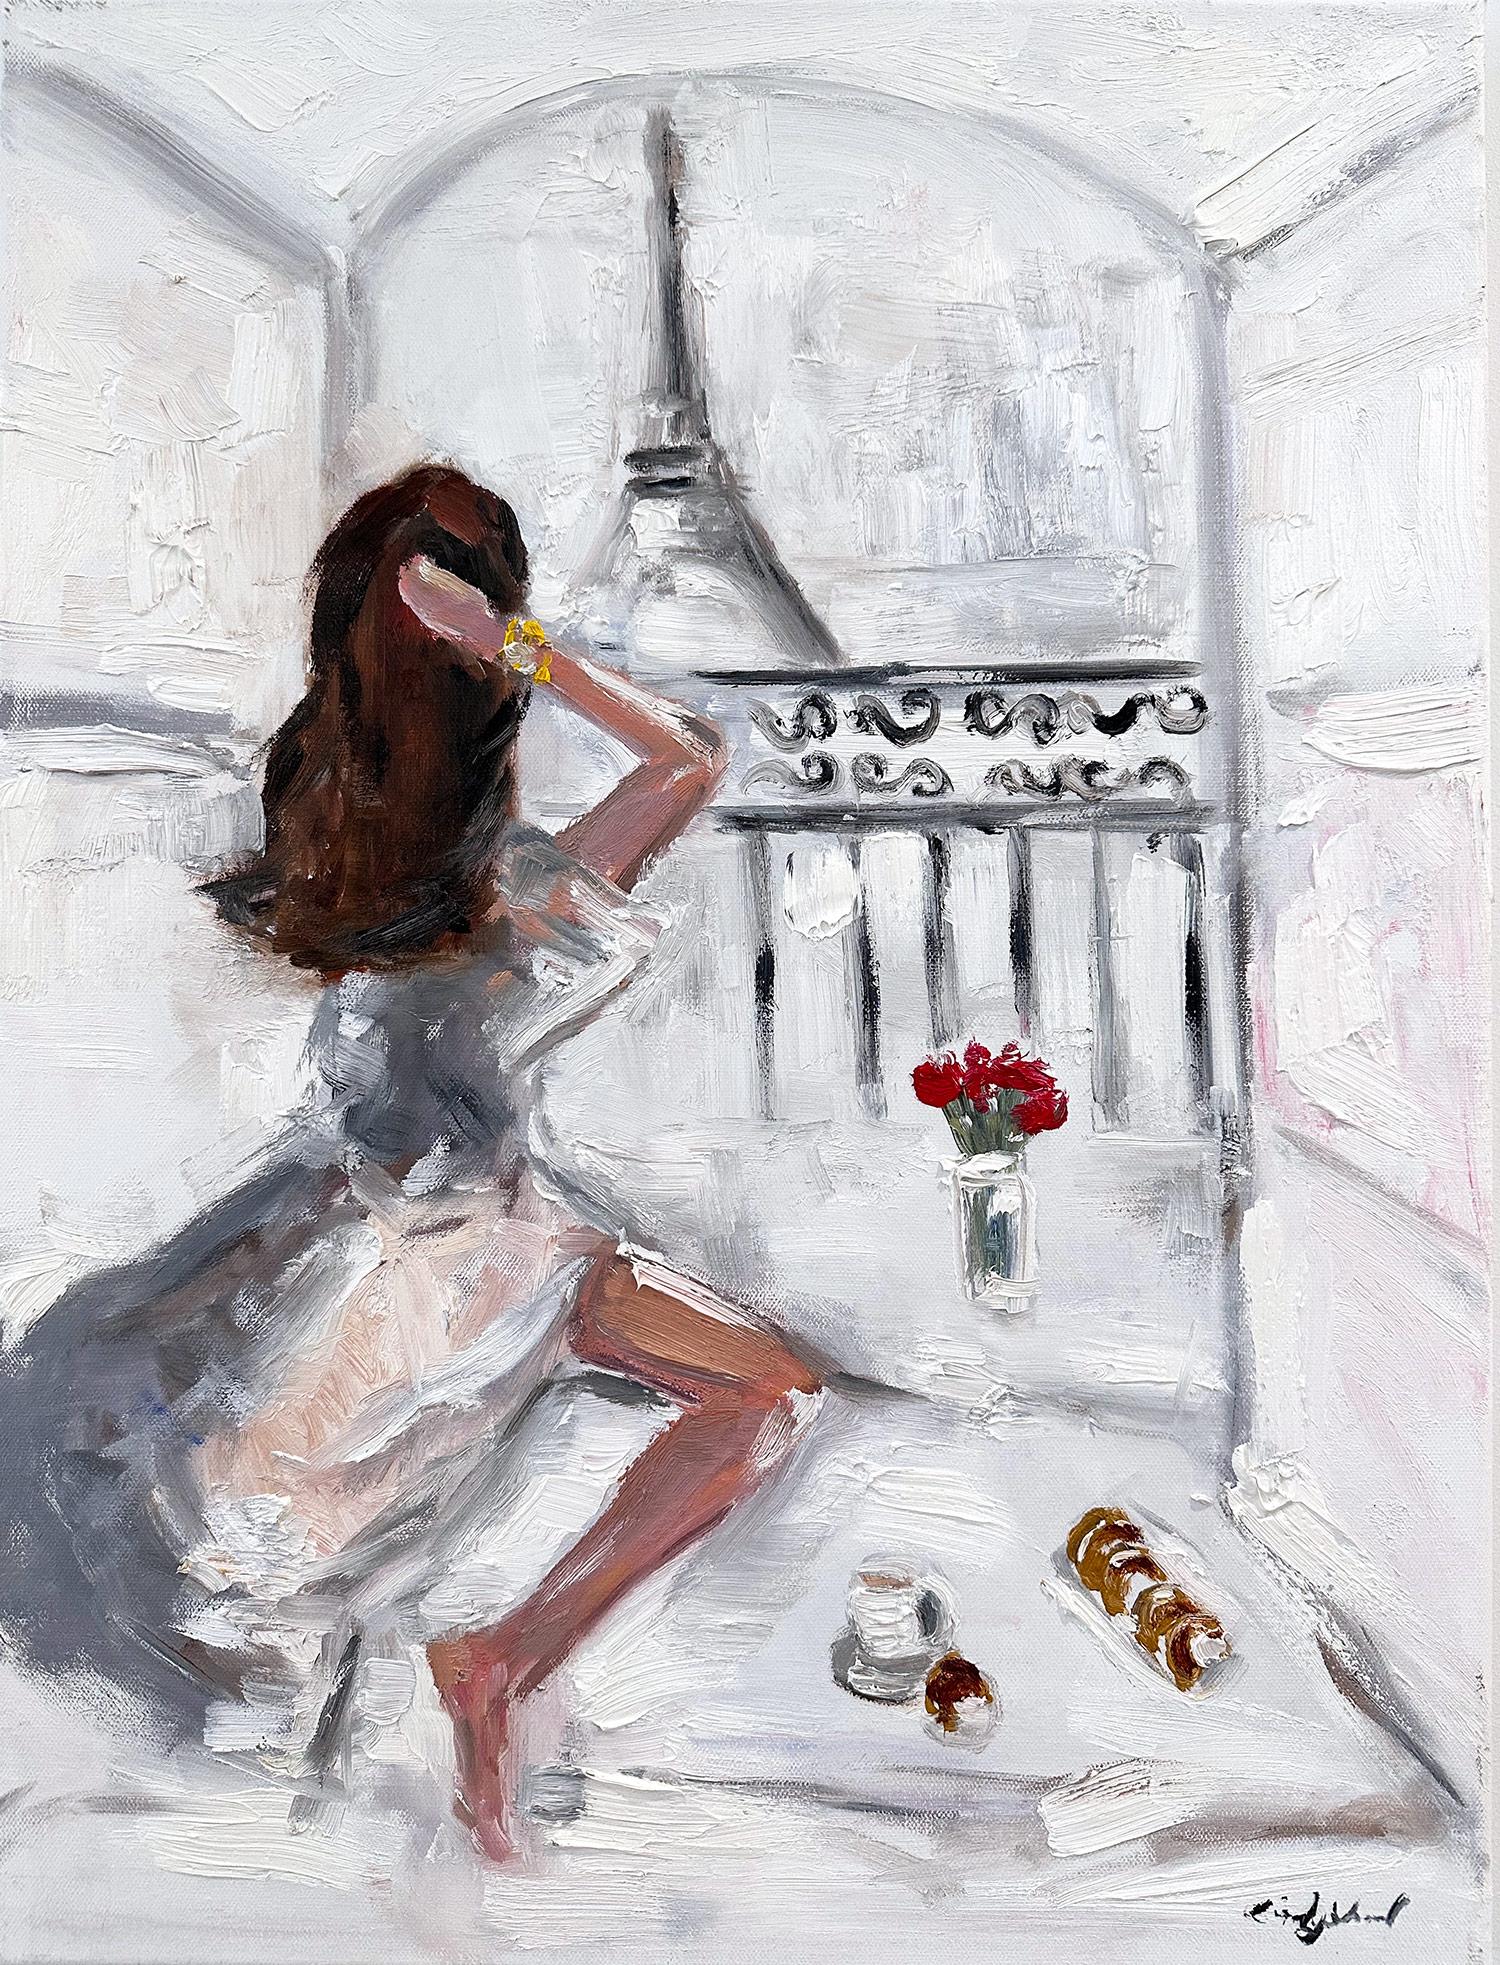 Cindy Shaoul Figurative Painting - "Paris is For Lovers" Figure in Paris by the Eiffel Tower Oil Painting on Canva 